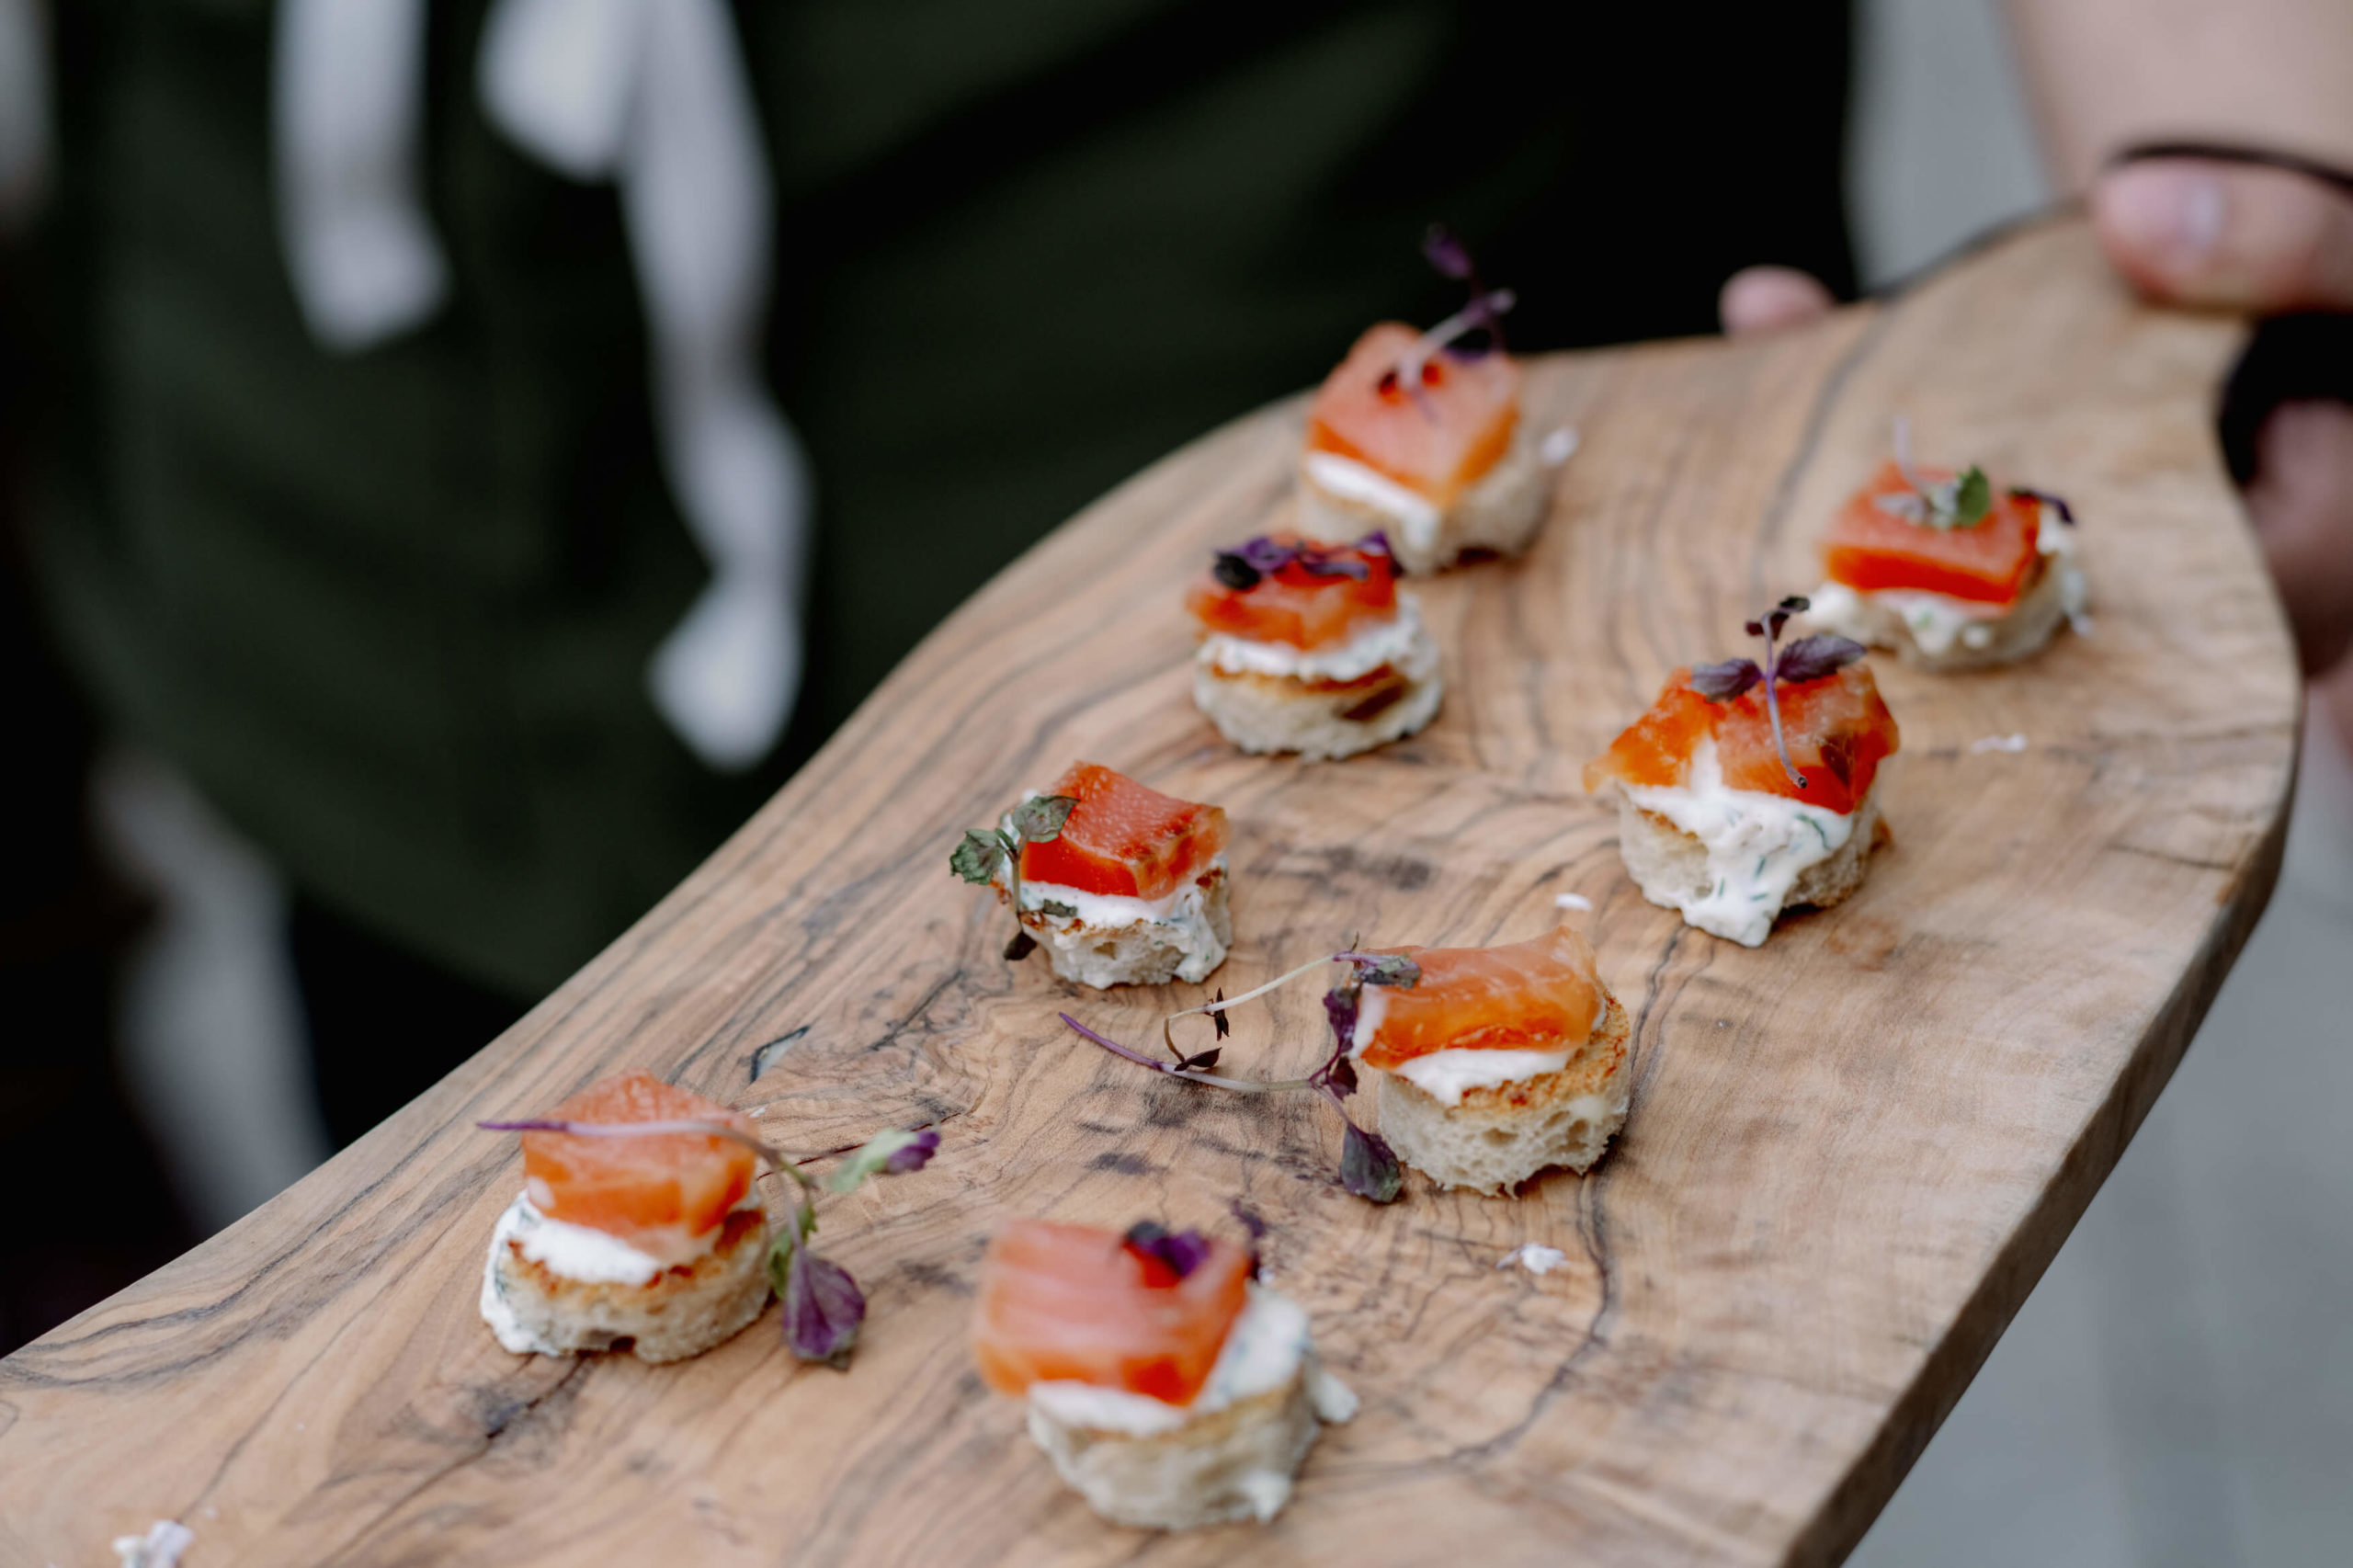 Canapes are served at a rehearsal dinner in The River Cafe NYC. Image by Jenny Fu Studio